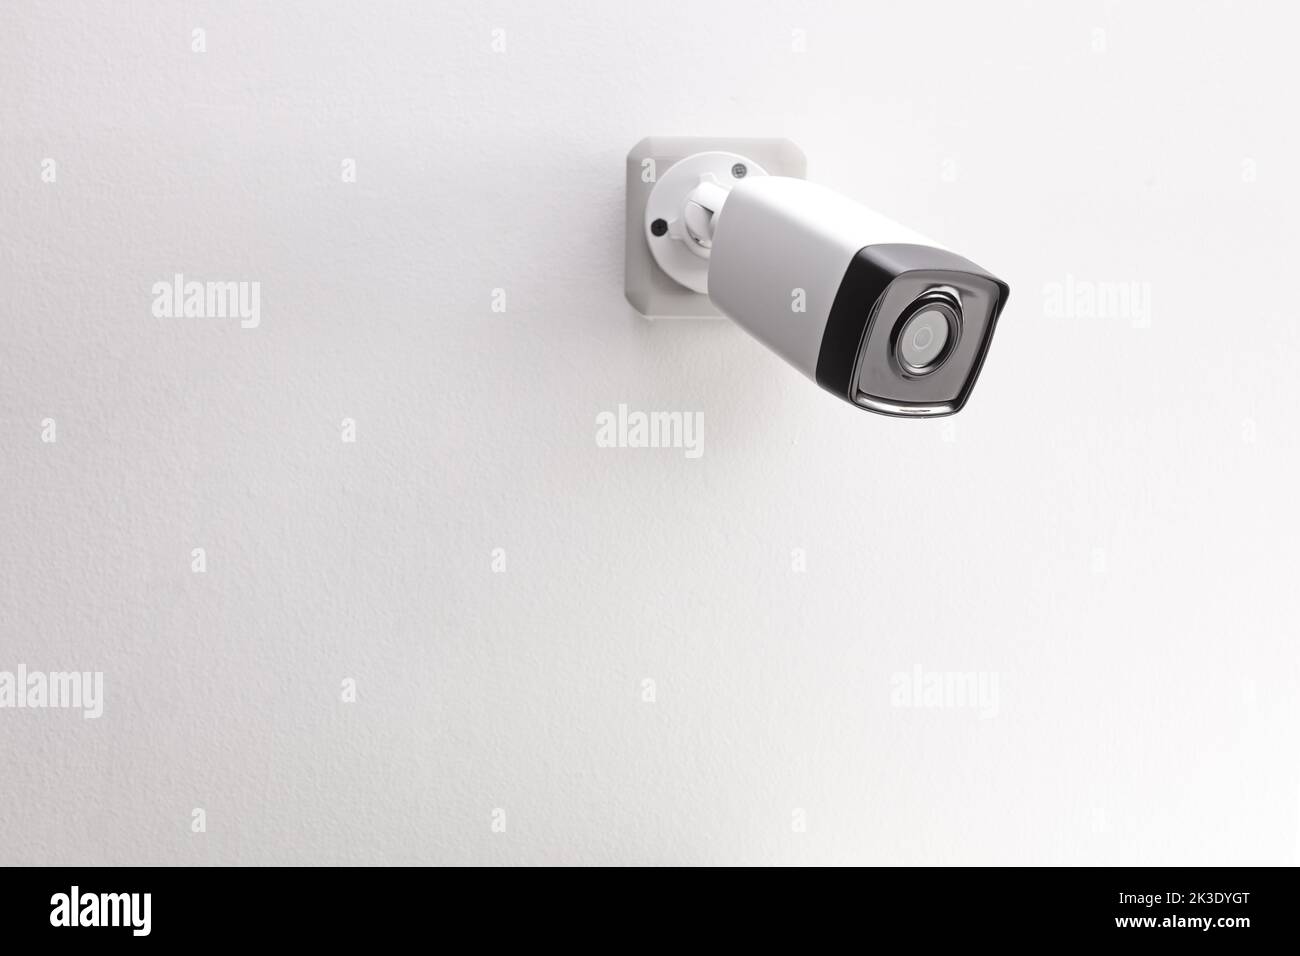 Security camera mounted on a wall Stock Photo